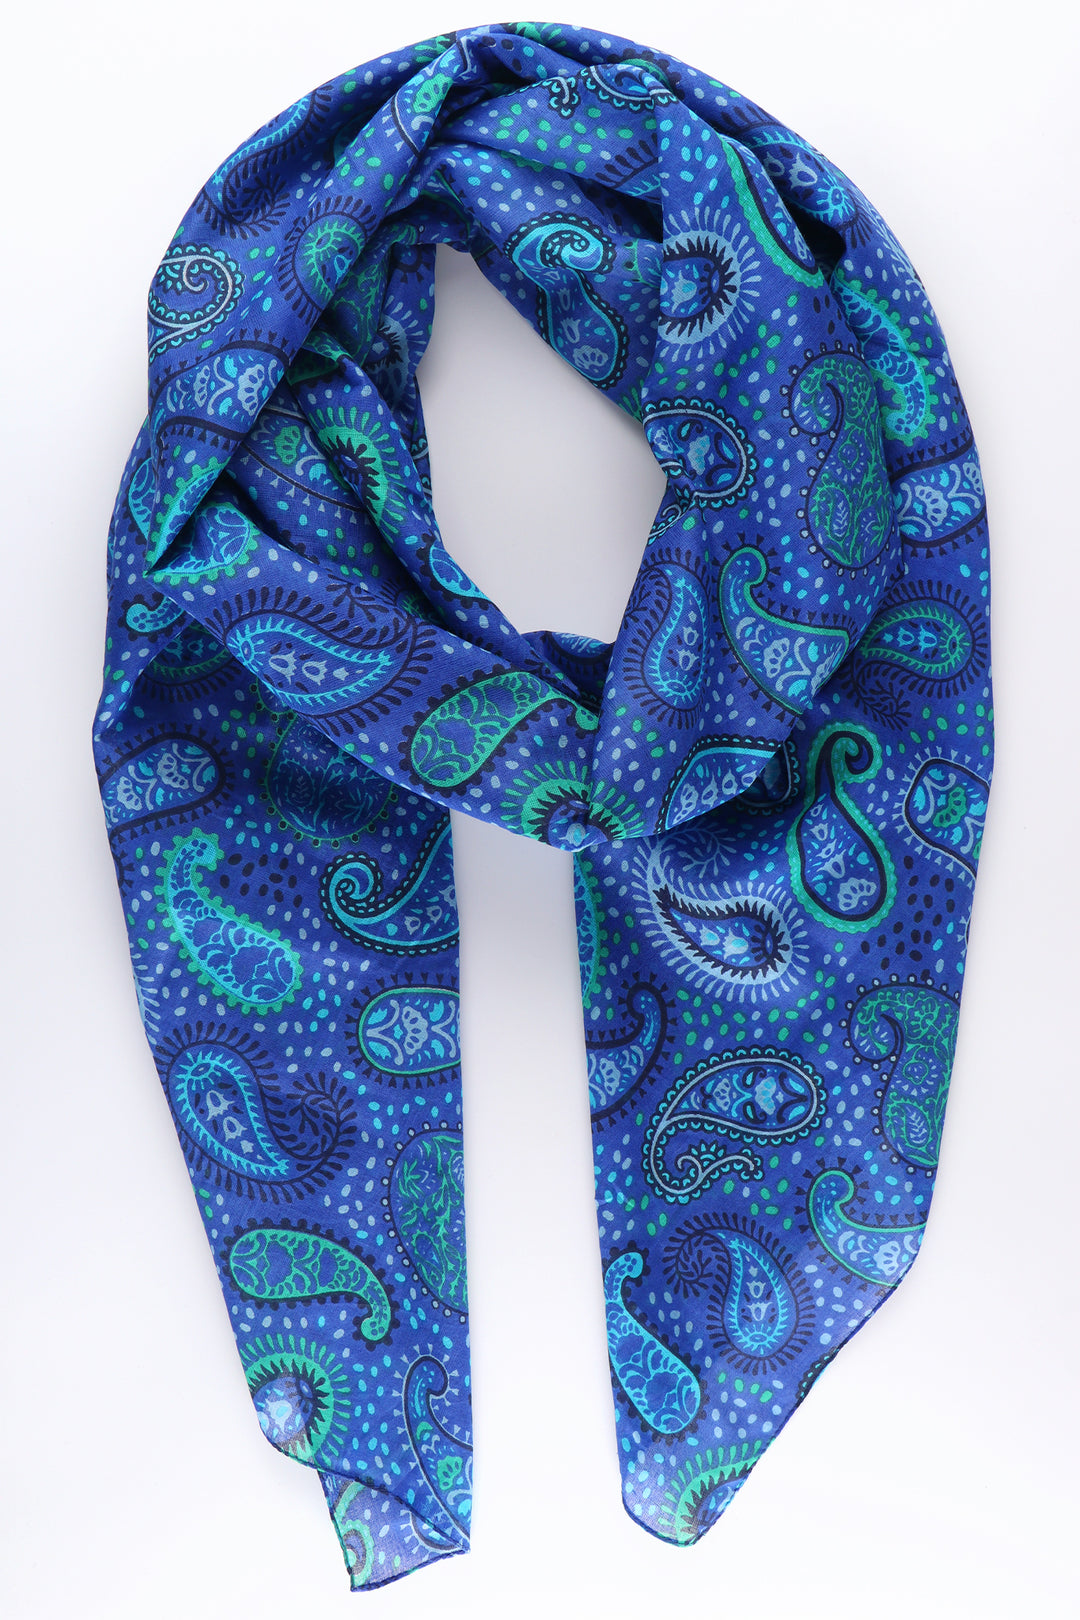 blue paisley pattern lightweight scarf, the scarf is blue with green paisley patterns